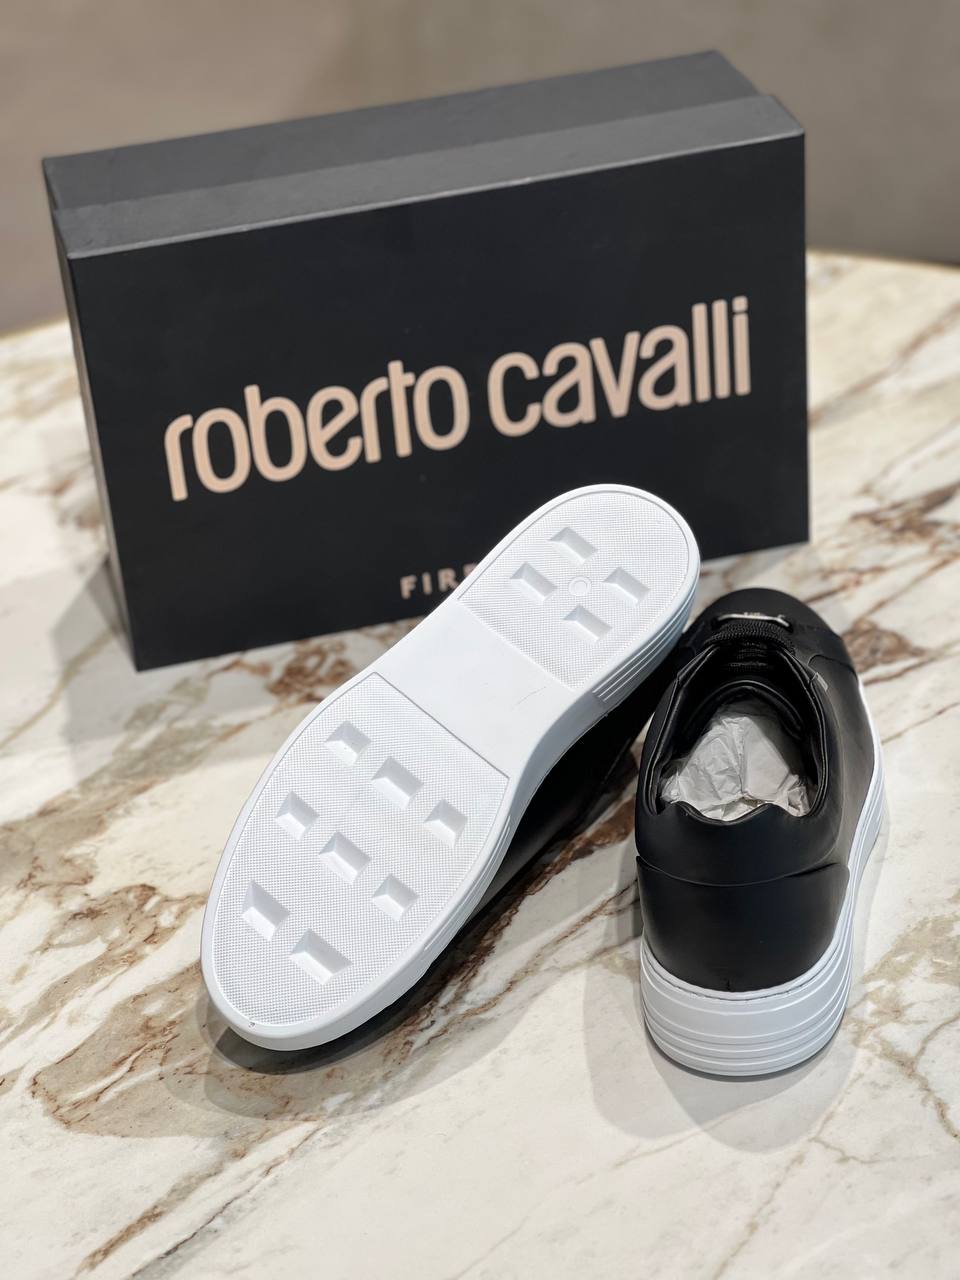 Roberto Cavalli Outlets 6118